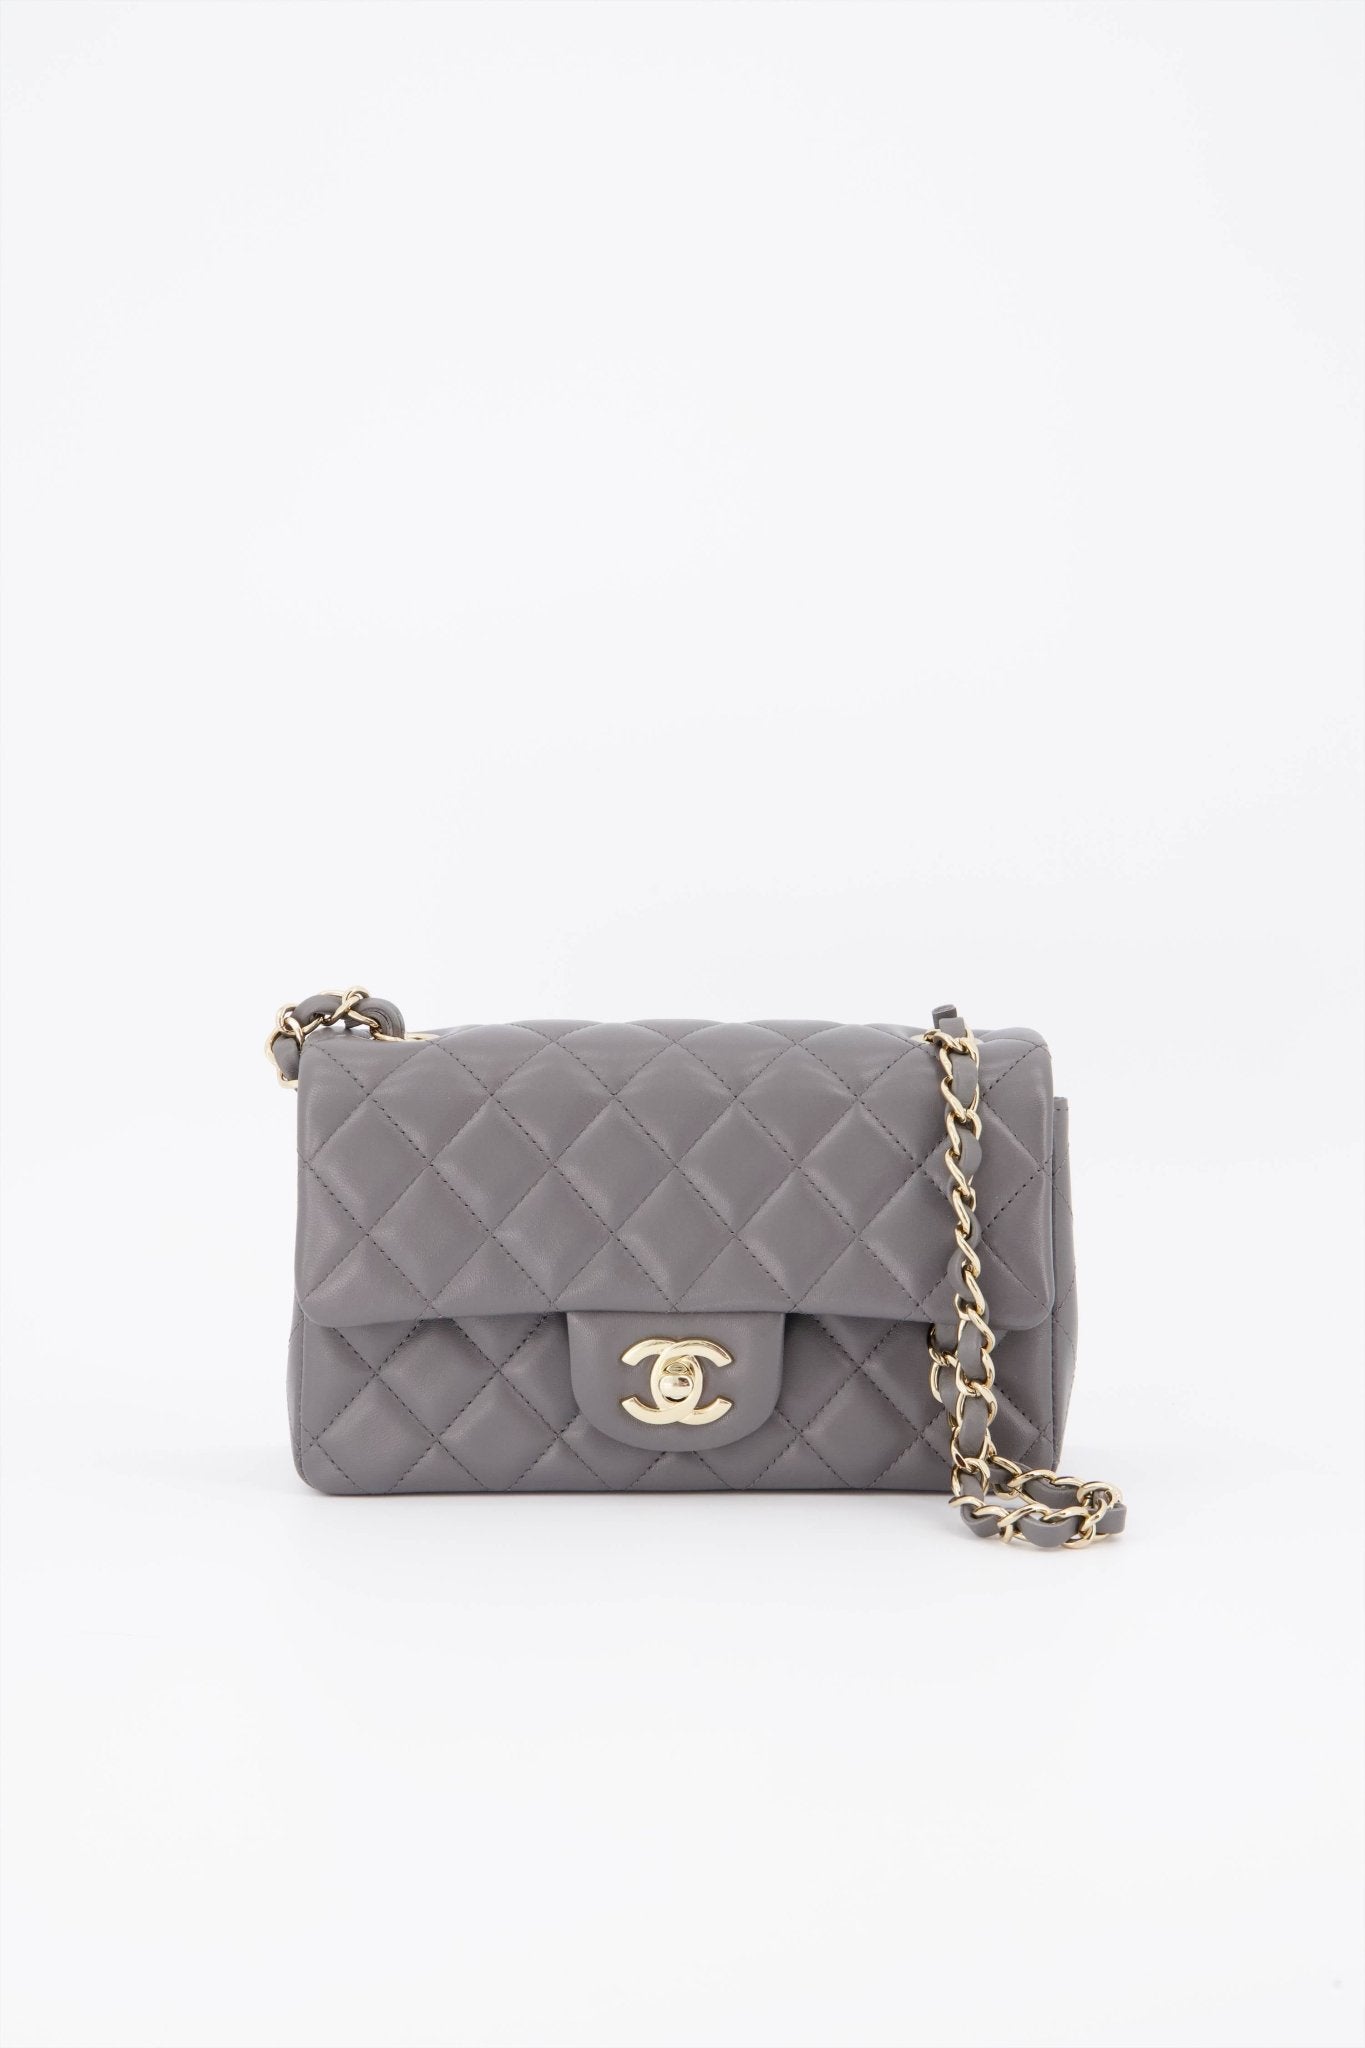 Chanel Mini Flap bag review  Is it worth it